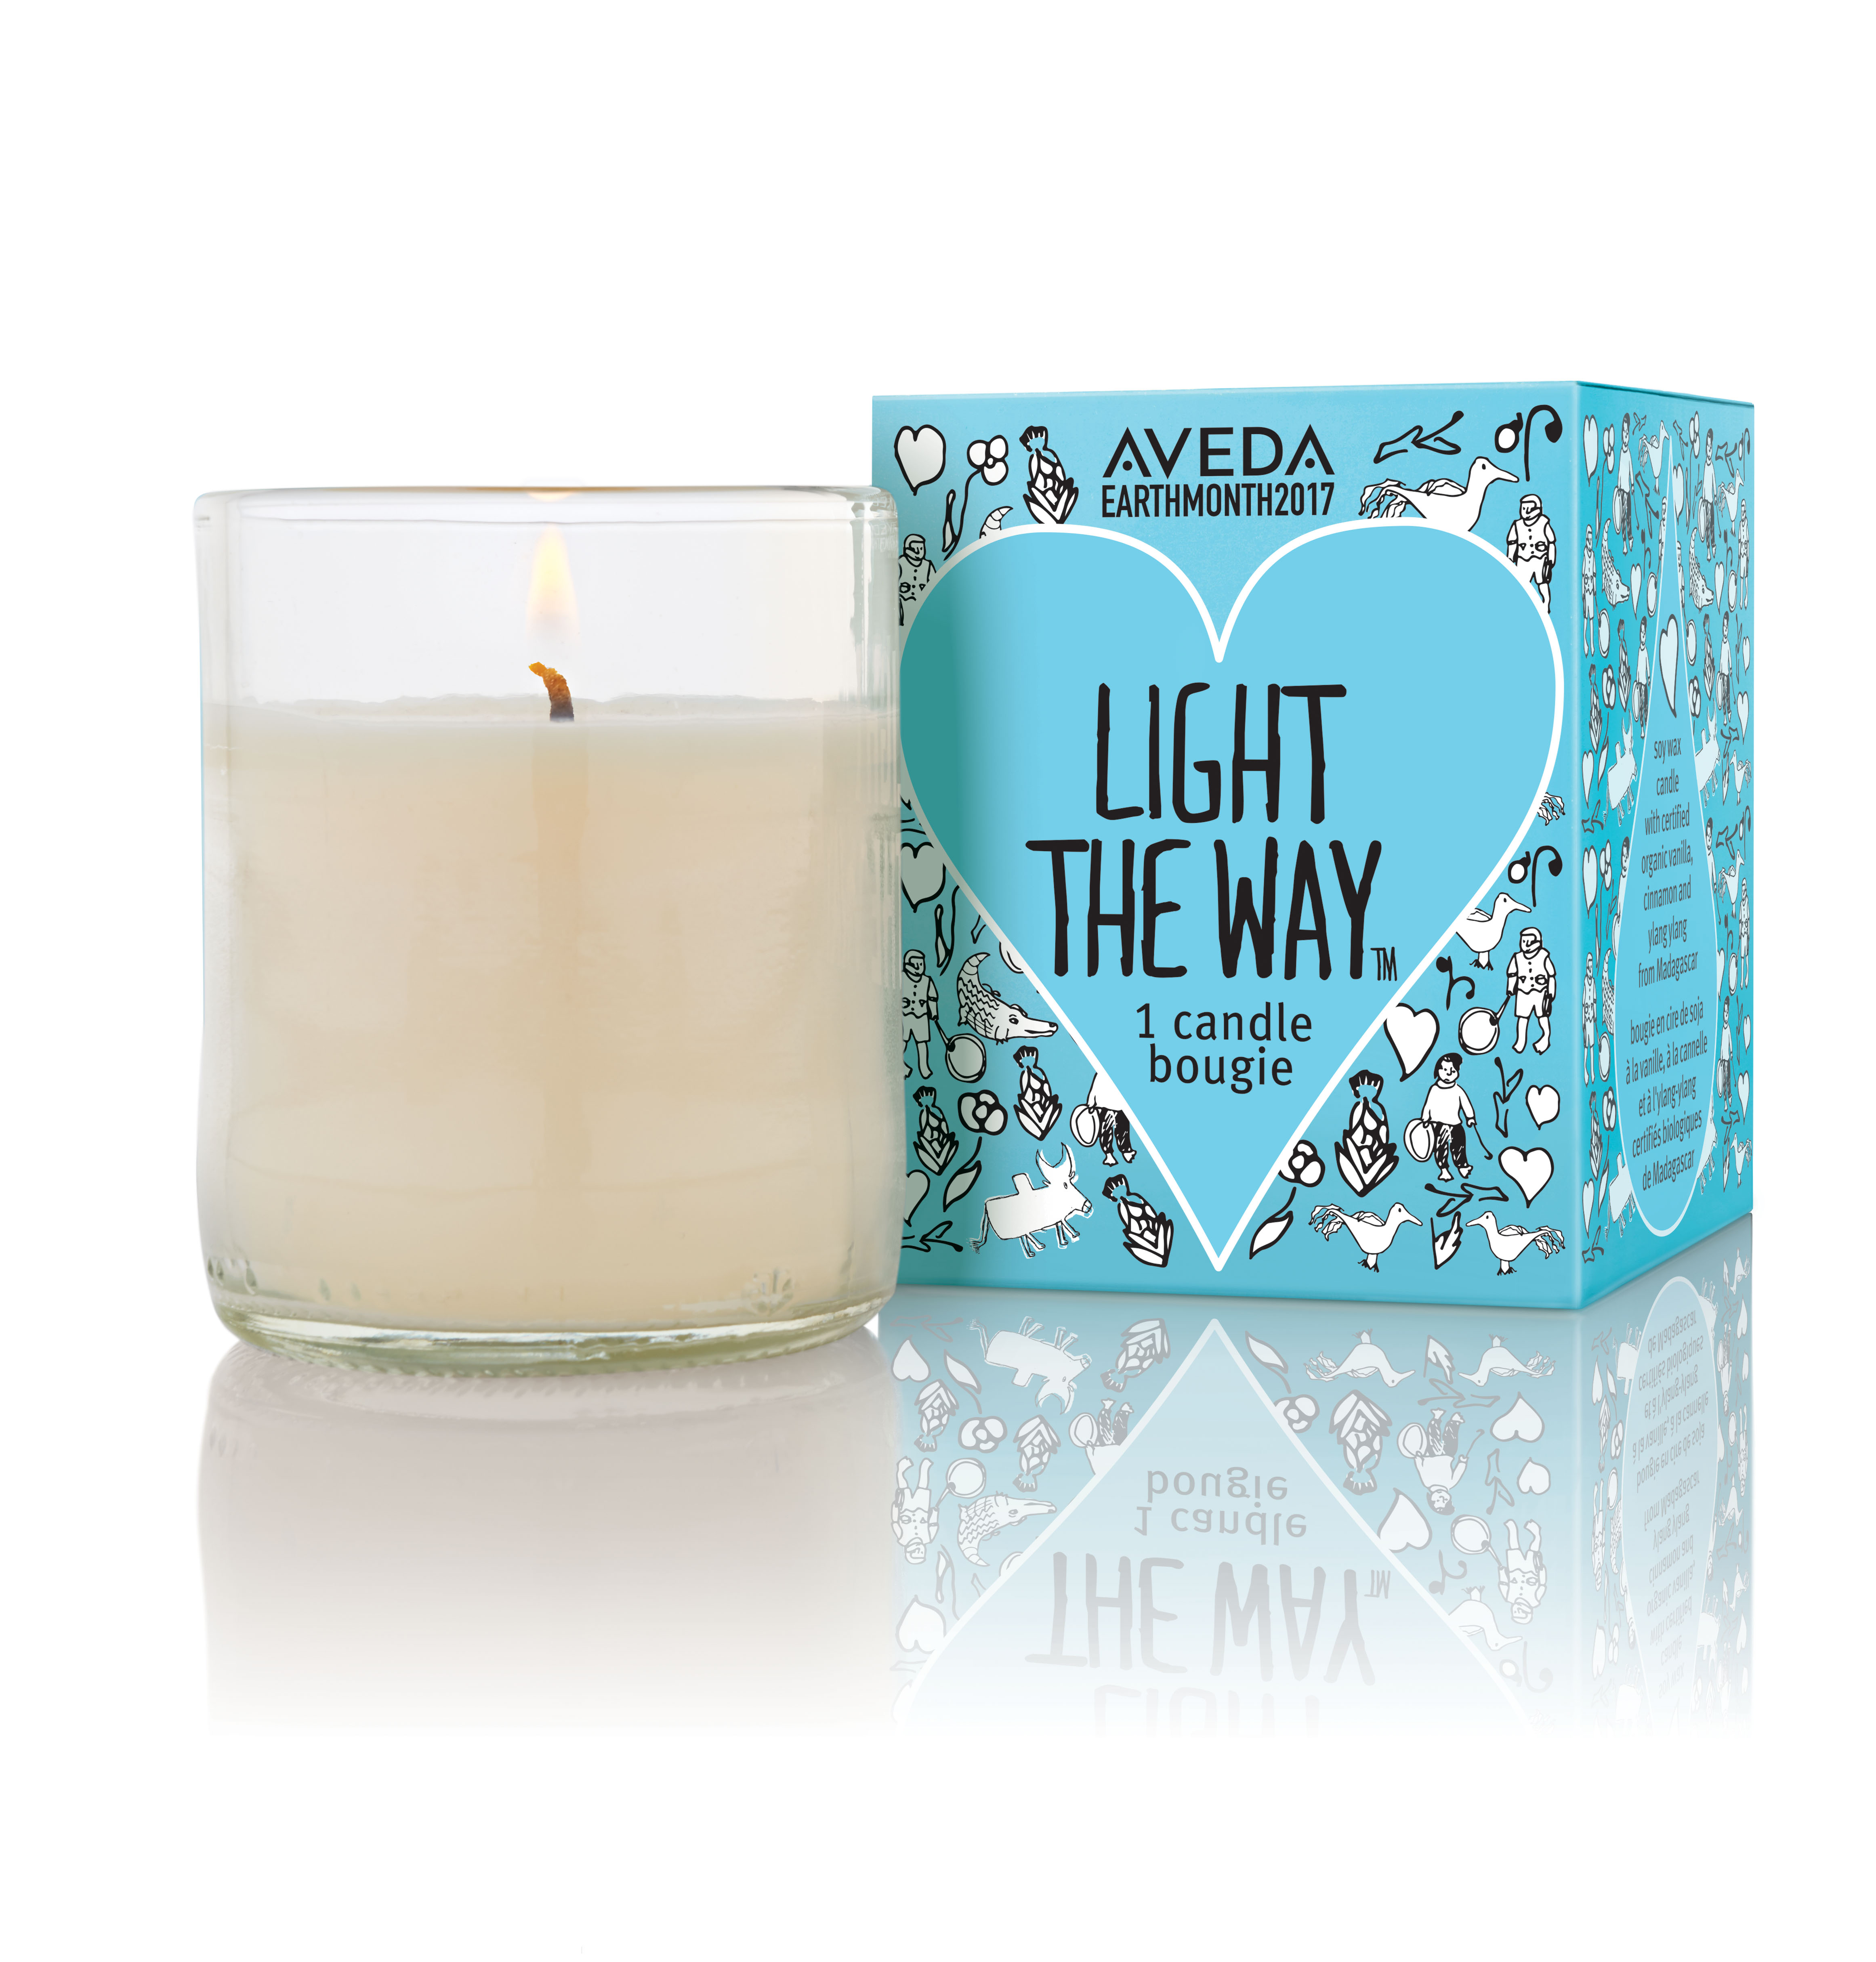 Aveda Earth Month candle